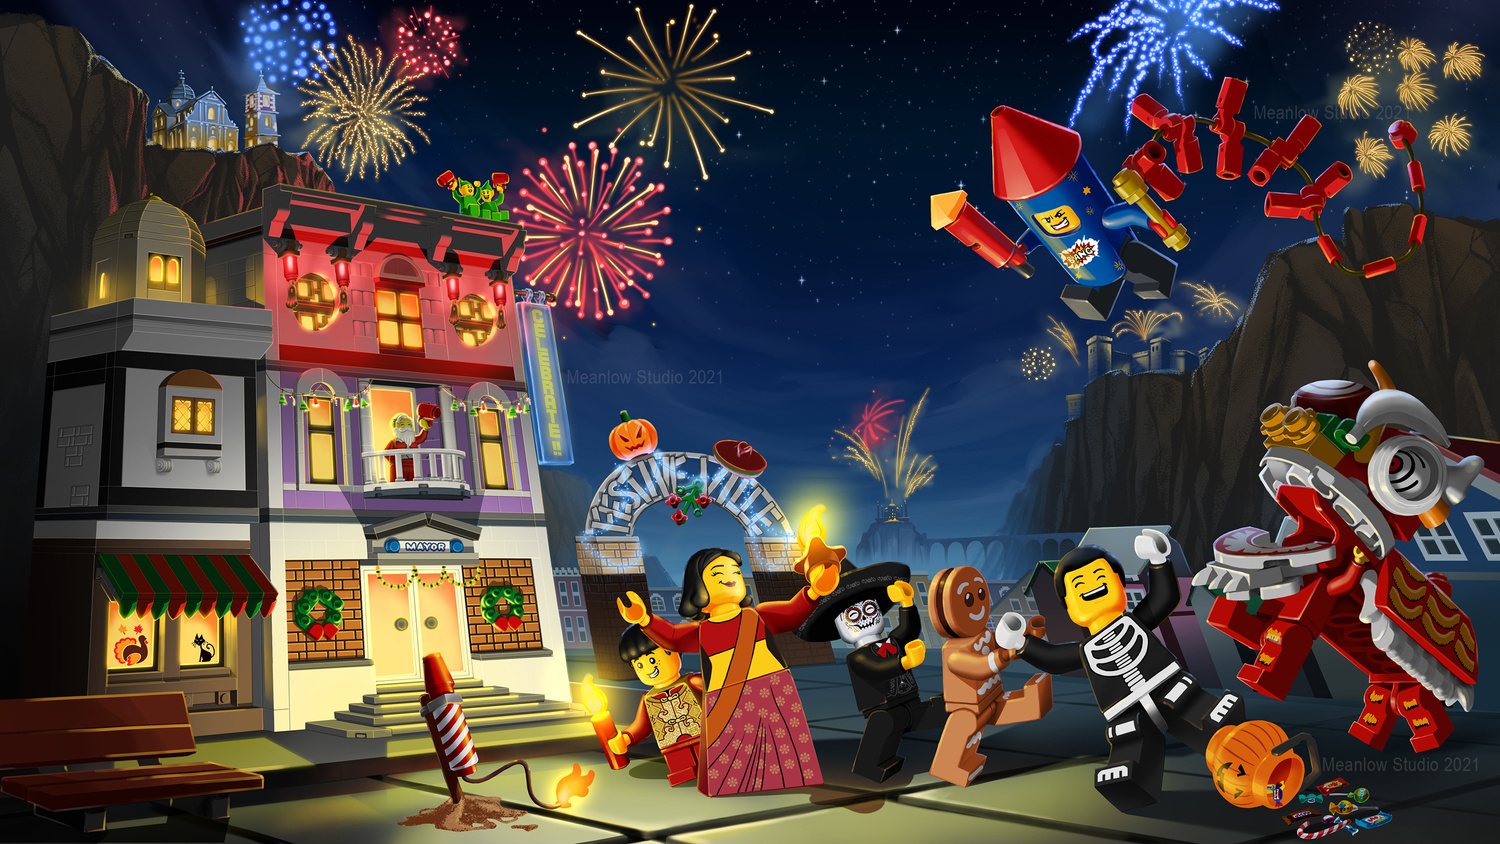 LEGO concept illustration for proposal. festive theme, lots of fireworks and celebration going on